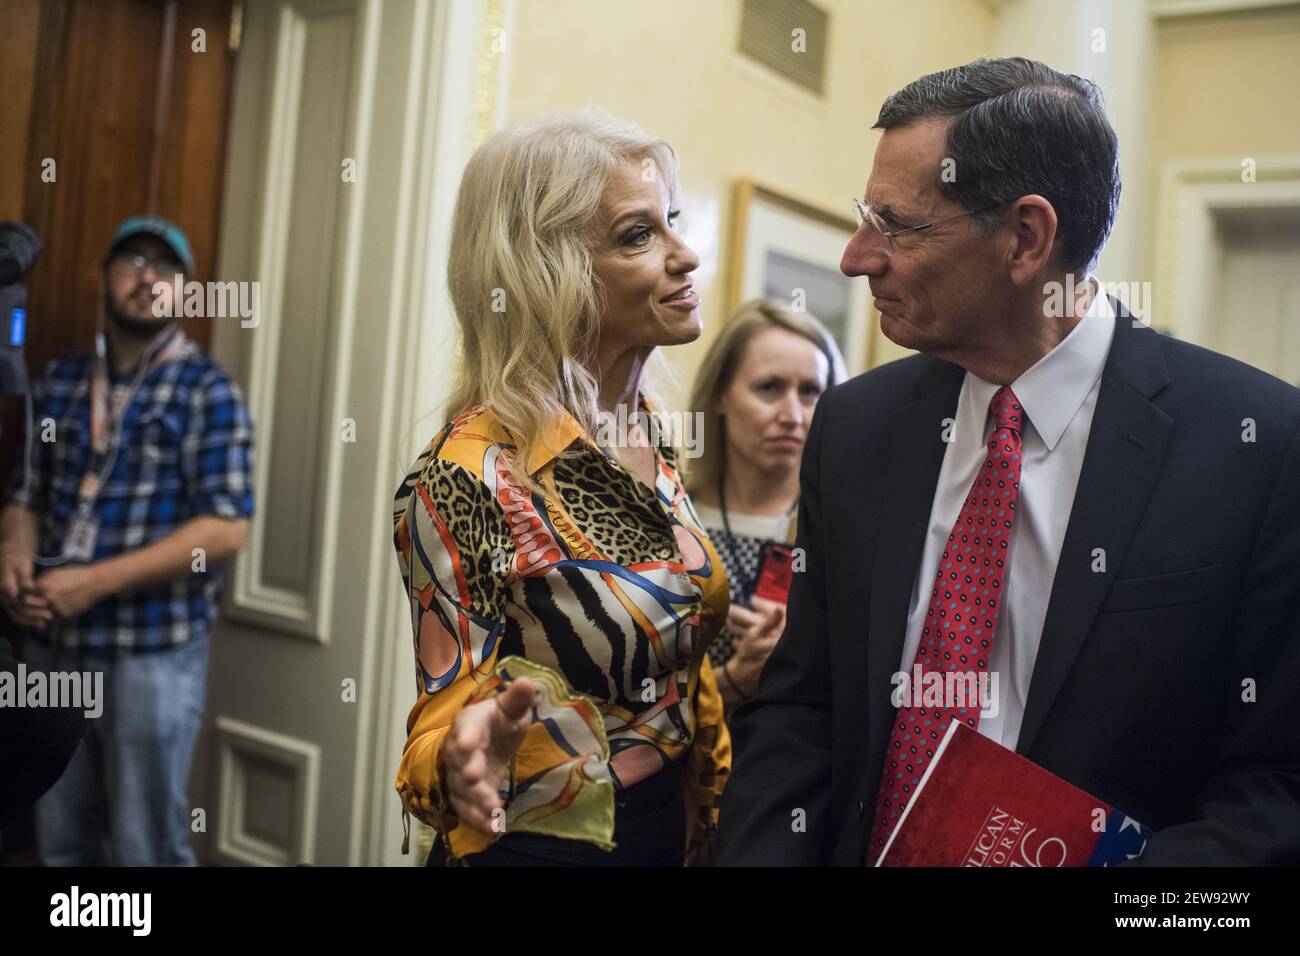 UNITED STATES - NOVEMBER 07: Sen. John Barrasso, R-Wyo., and White House counselor Kellyanne Conway, are seen after a news conference in the Capitol where GOP senators said families and small businesses would benefit from tax reform on November 7, 2017. (Photo By Tom Williams/CQ Roll Call) Stock Photo